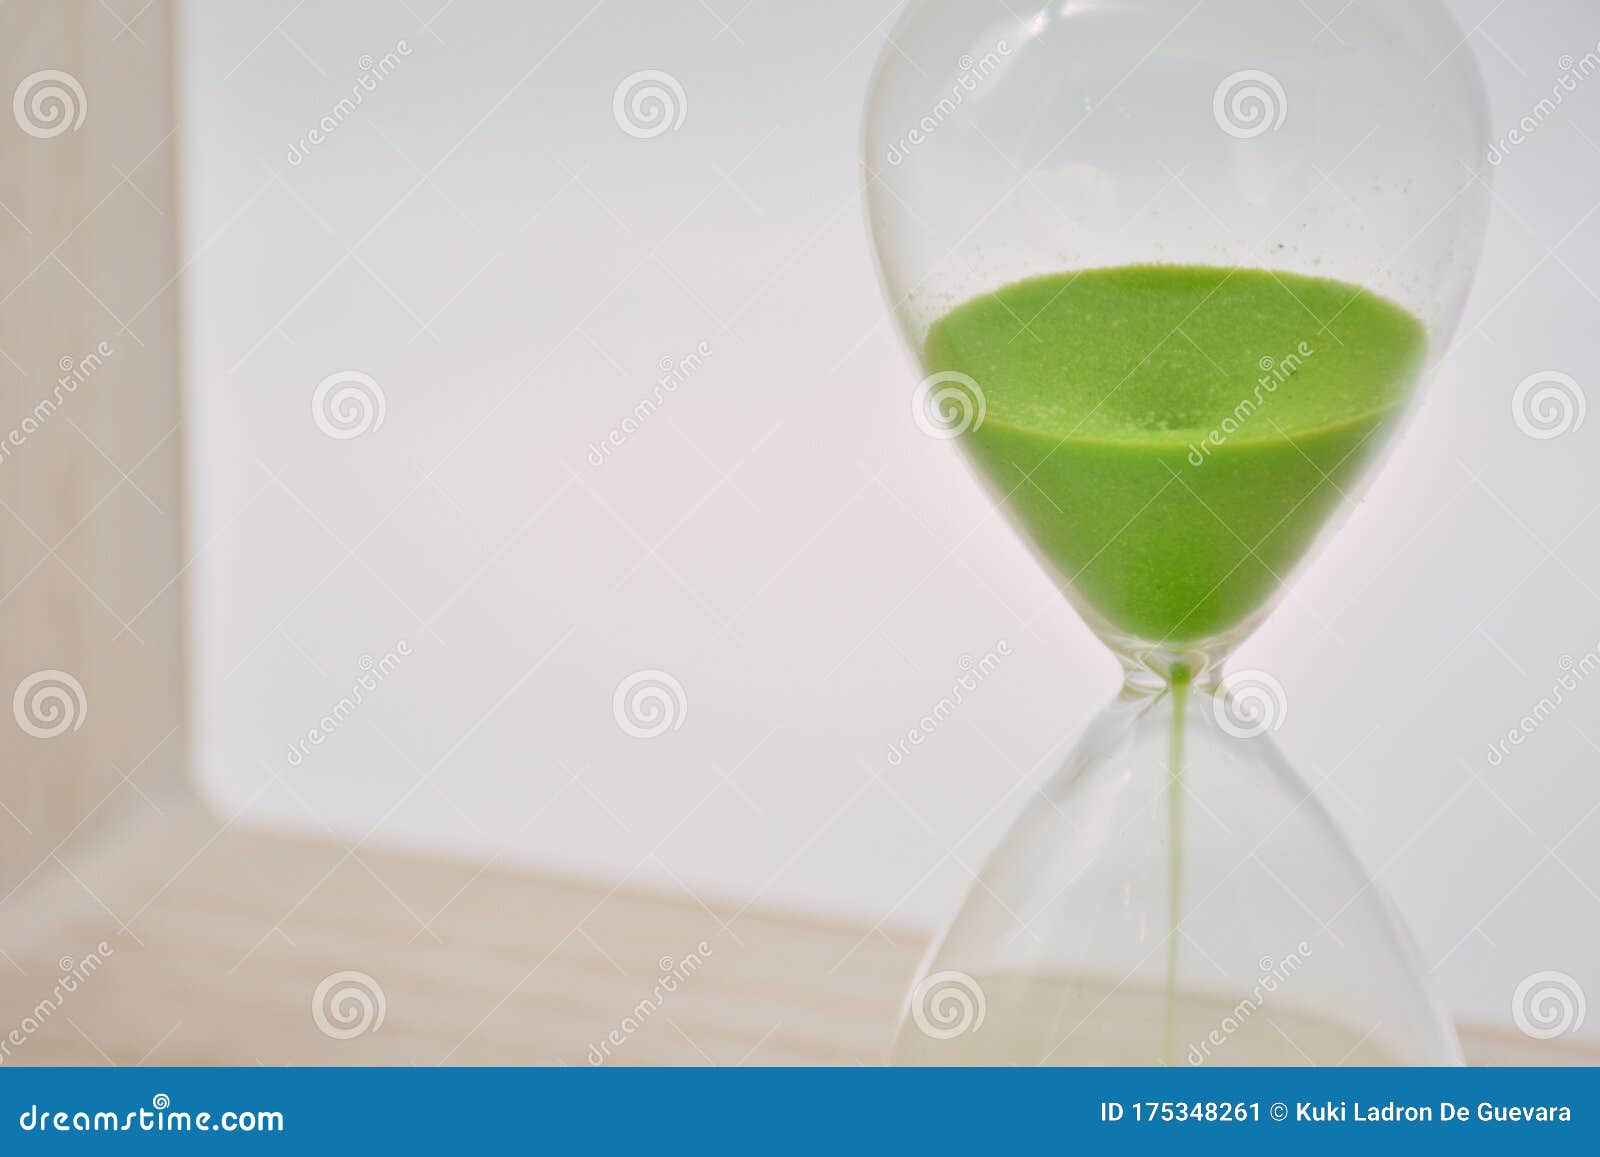 green hourglass, counting time